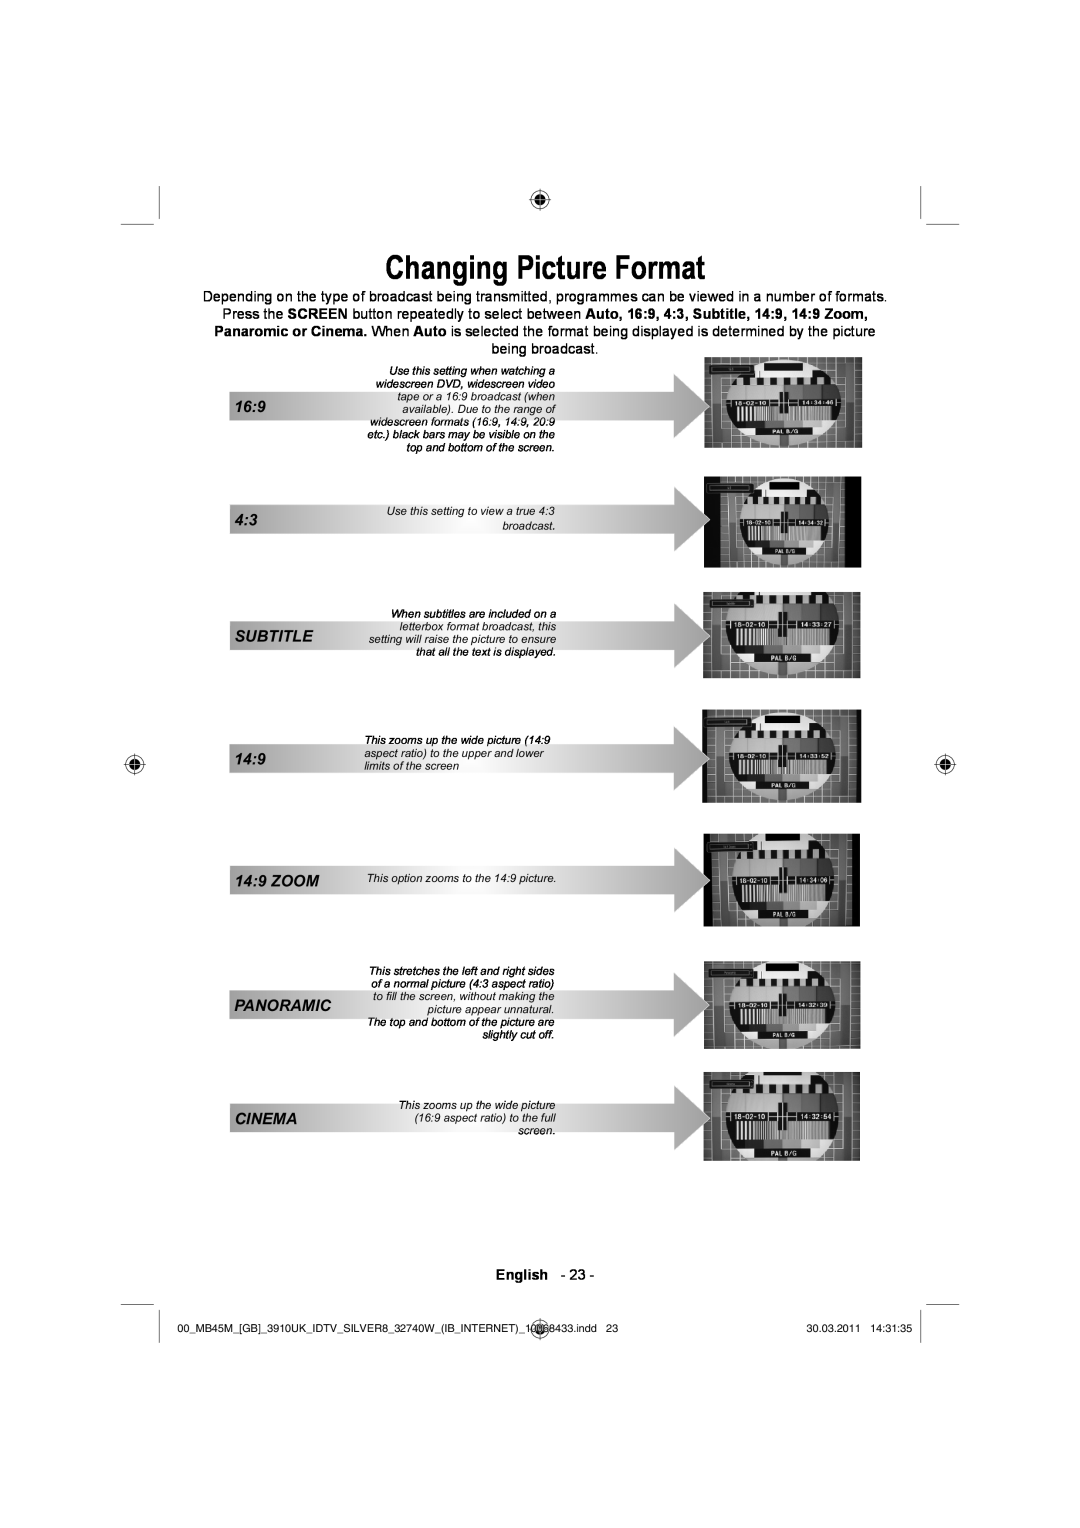 Toshiba 32BV500B owner manual Changing Picture Format, SUBTITLE 149 149 ZOOM PANORAMIC CINEMA 